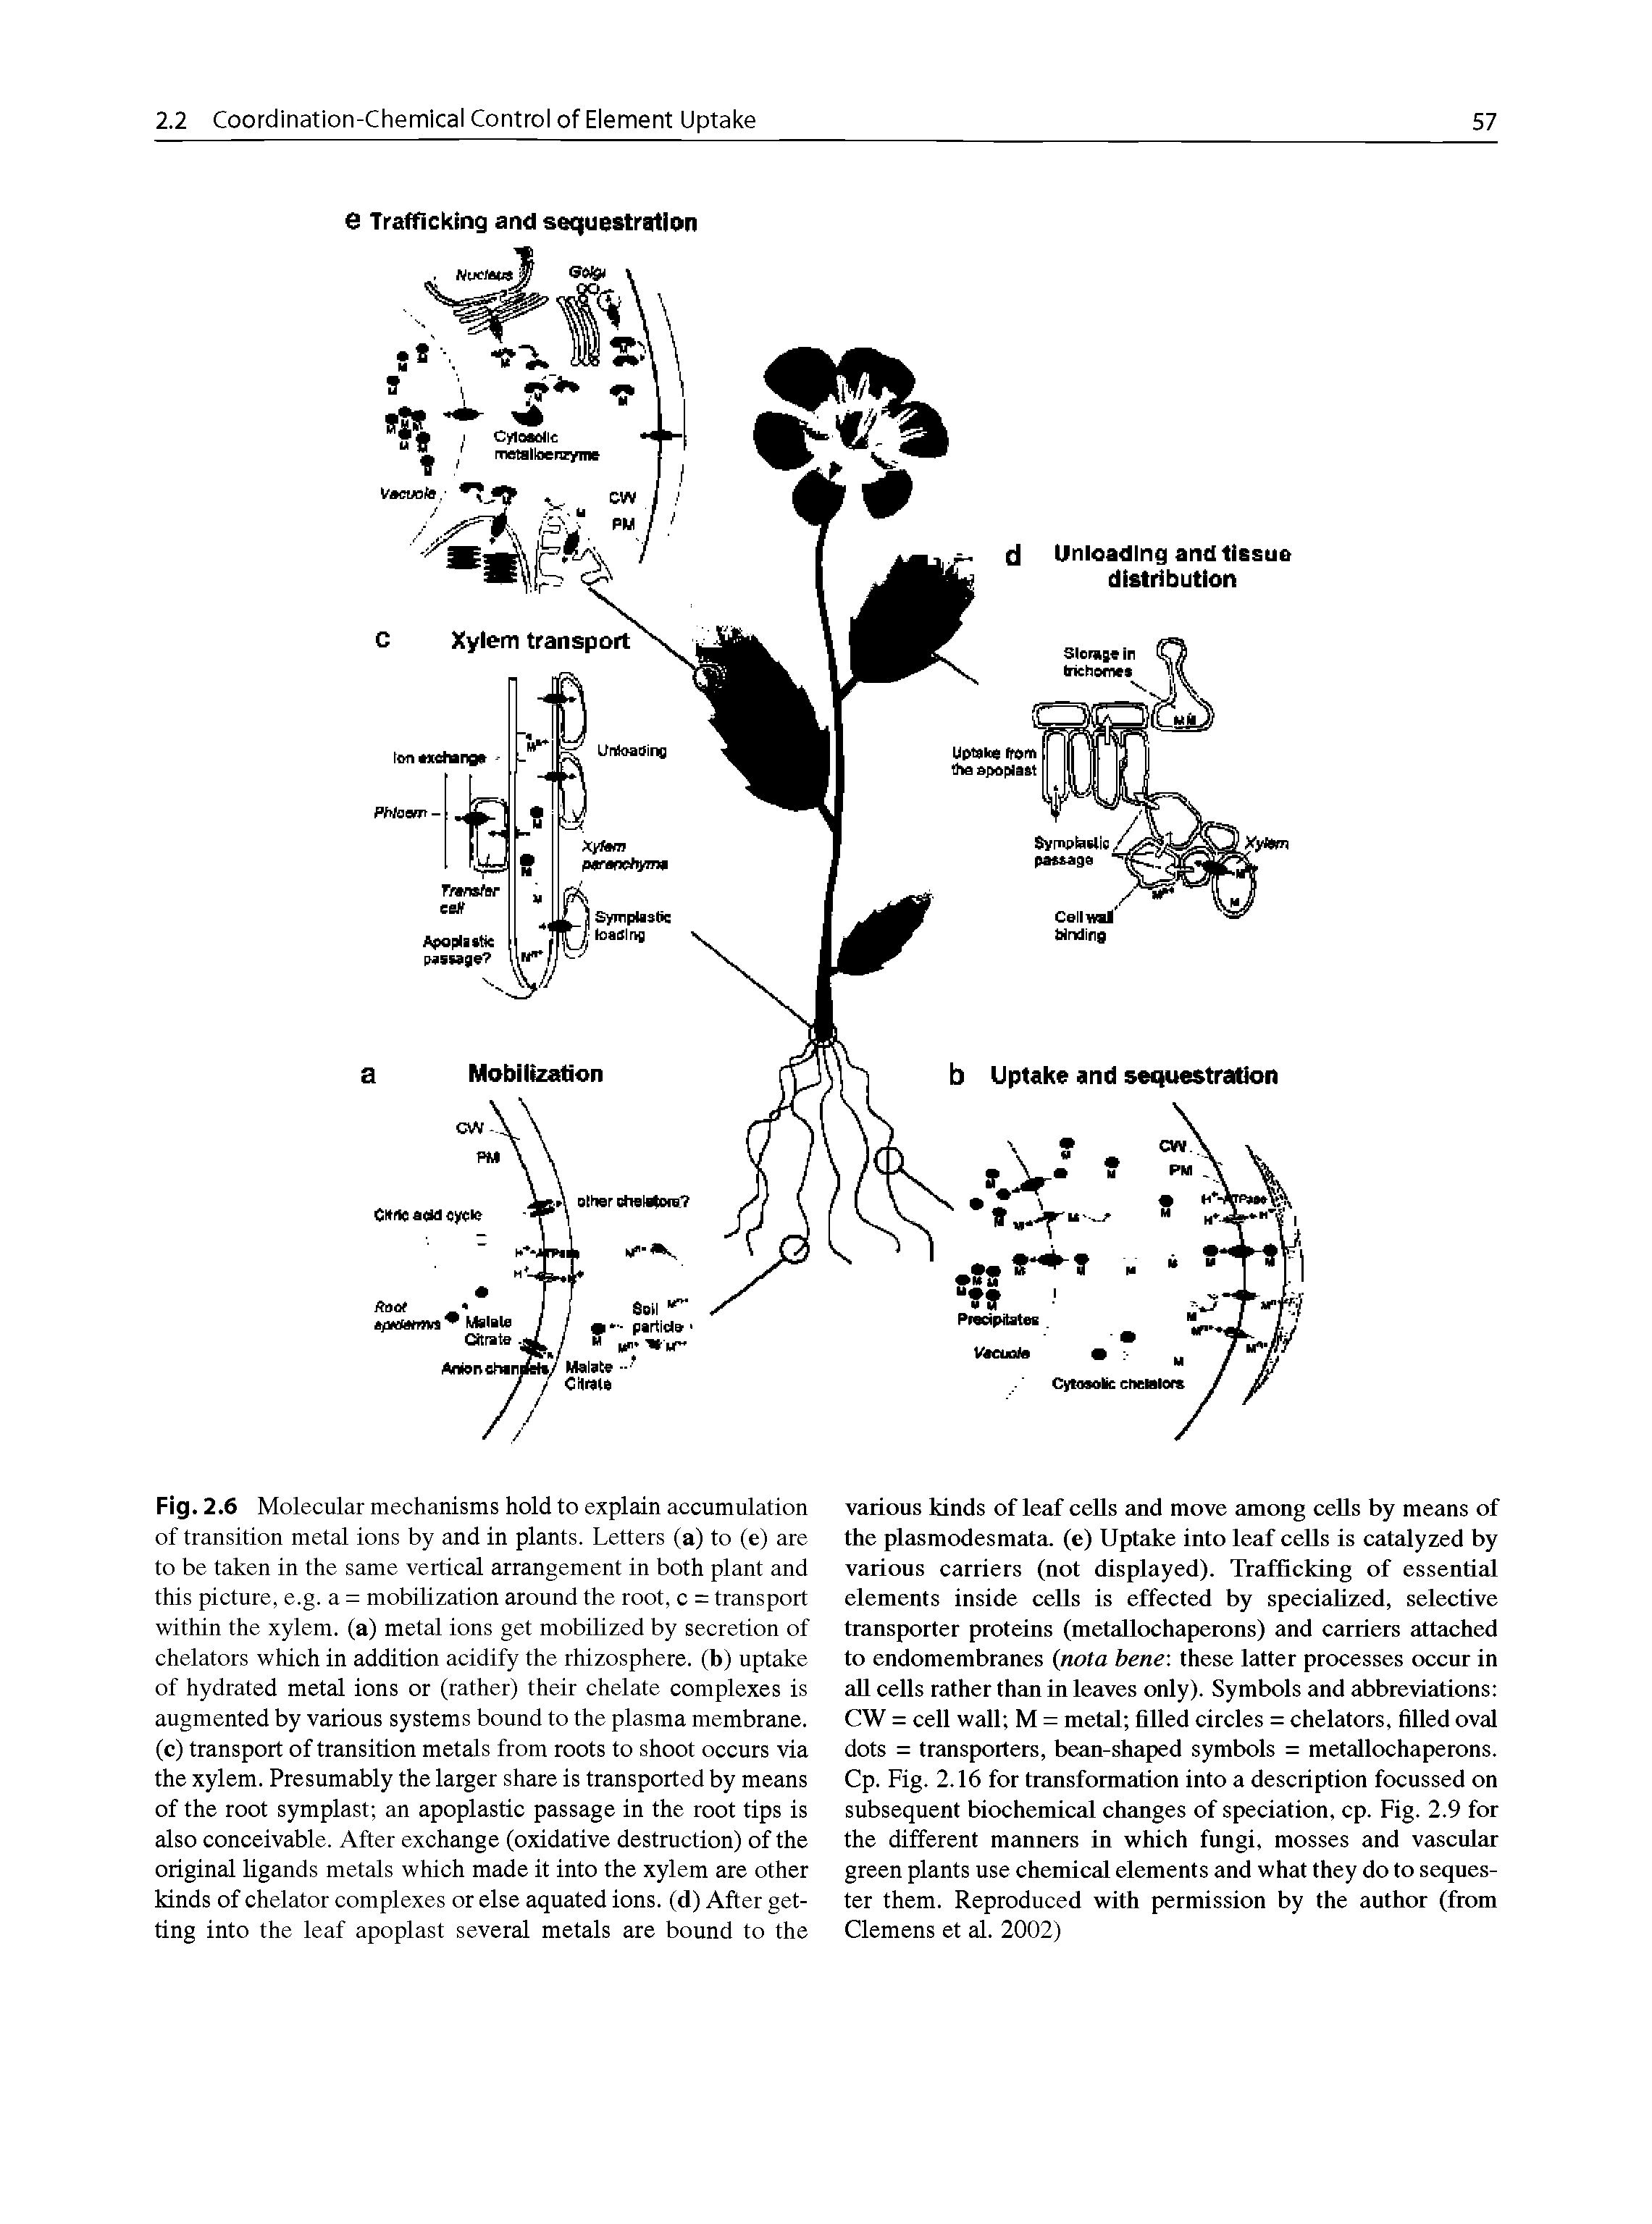 Fig. 2.6 Molecular mechanisms hold to explain accumulation of transition metal ions by and in plants. Letters (a) to (e) are to be taken in the same vertical arrangement in both plant and this picture, e.g. a = mobilization around the root, c = transport within the xylem. (a) metal ions get mobilized by secretion of chelators which in addition acidify the rhizosphere. (b) uptake of hydrated metal ions or (rather) their chelate complexes is augmented by various systems bound to the plasma membrane, (c) transport of transition metals from roots to shoot occurs via the xylem. Presumably the larger share is transported by means of the root symplast an apoplastic passage in the root tips is also conceivable. After exchange (oxidative destruction) of the original ligands metals which made it into the xylem are other kinds of chelator complexes or else aquated ions, (d) After getting into the leaf apoplast several metals are bound to the...